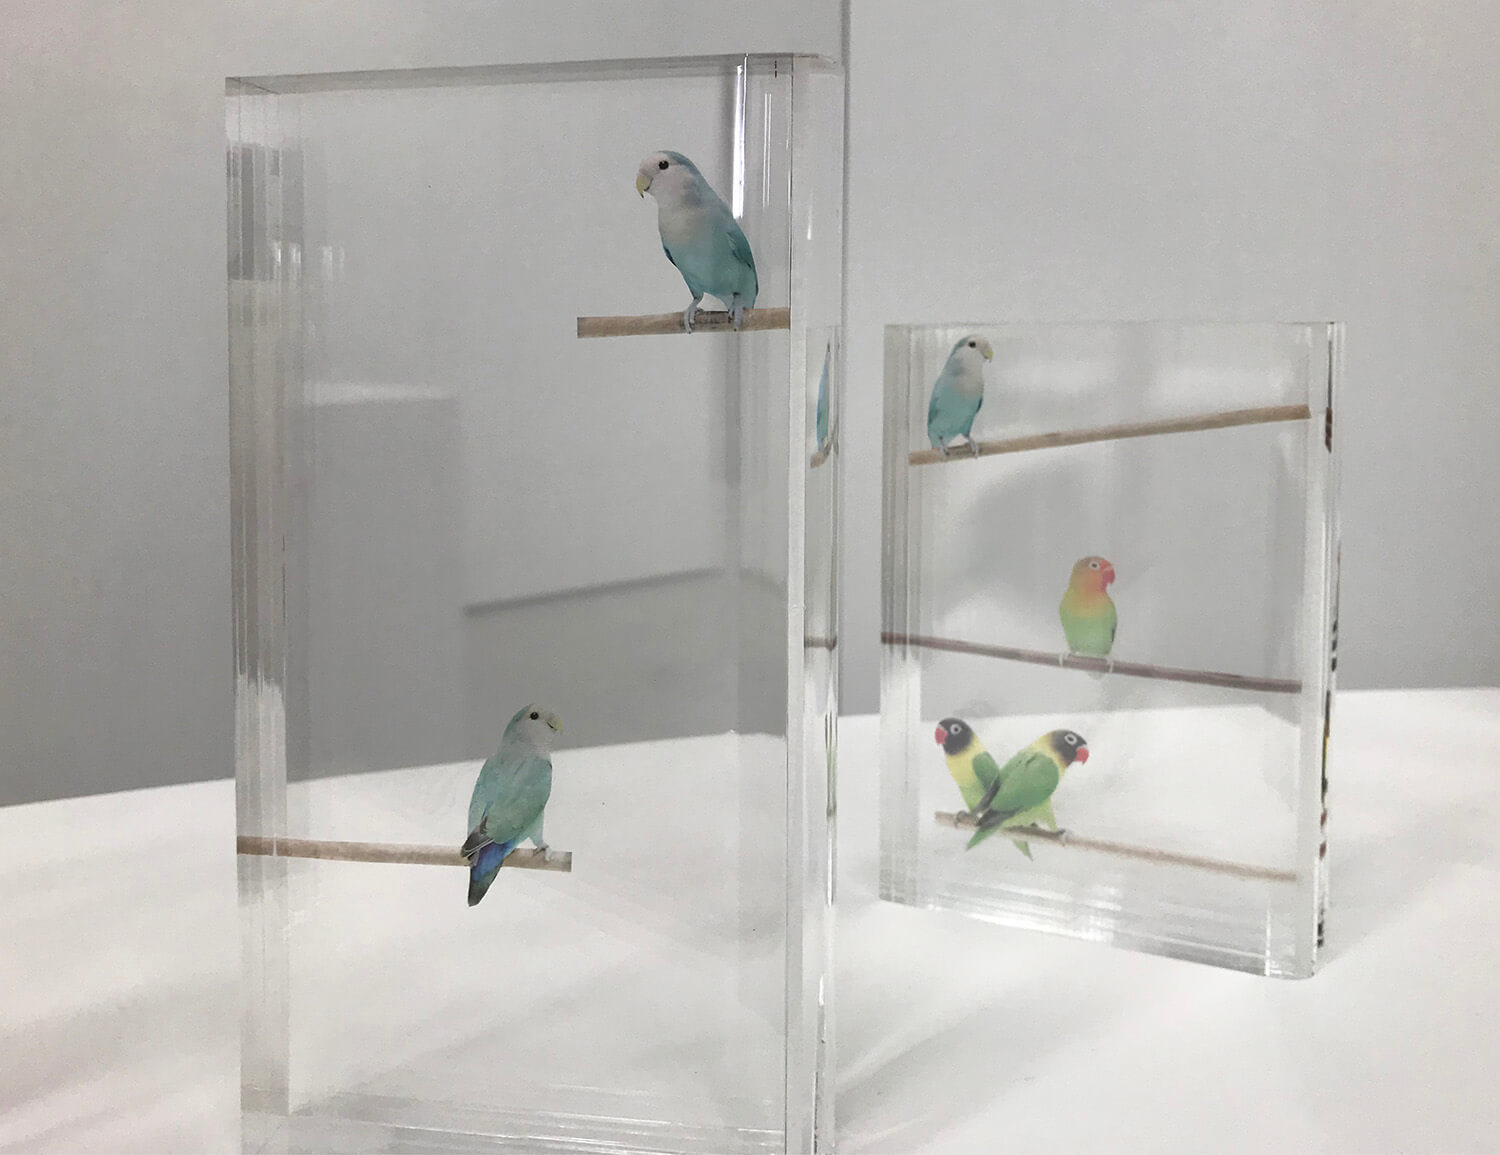 llibraly-color bird<br>acrylic and transfer seal<br>105 x 200 x 32 mm each<br>2019